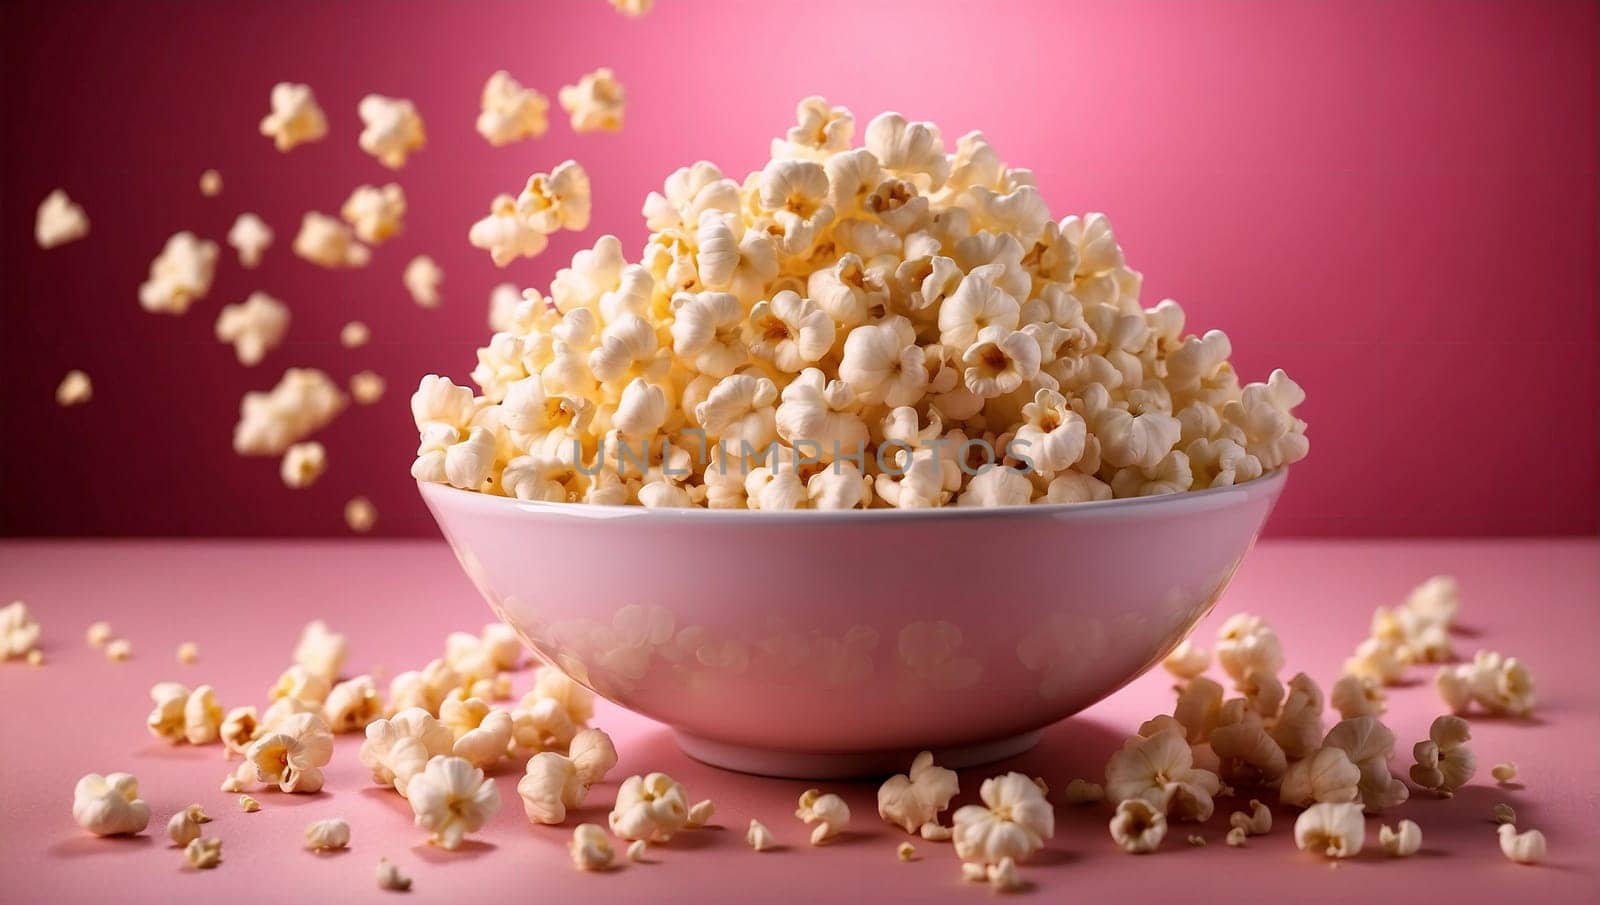 popcorn in a glass bowl on a bright pink background by Севостьянов